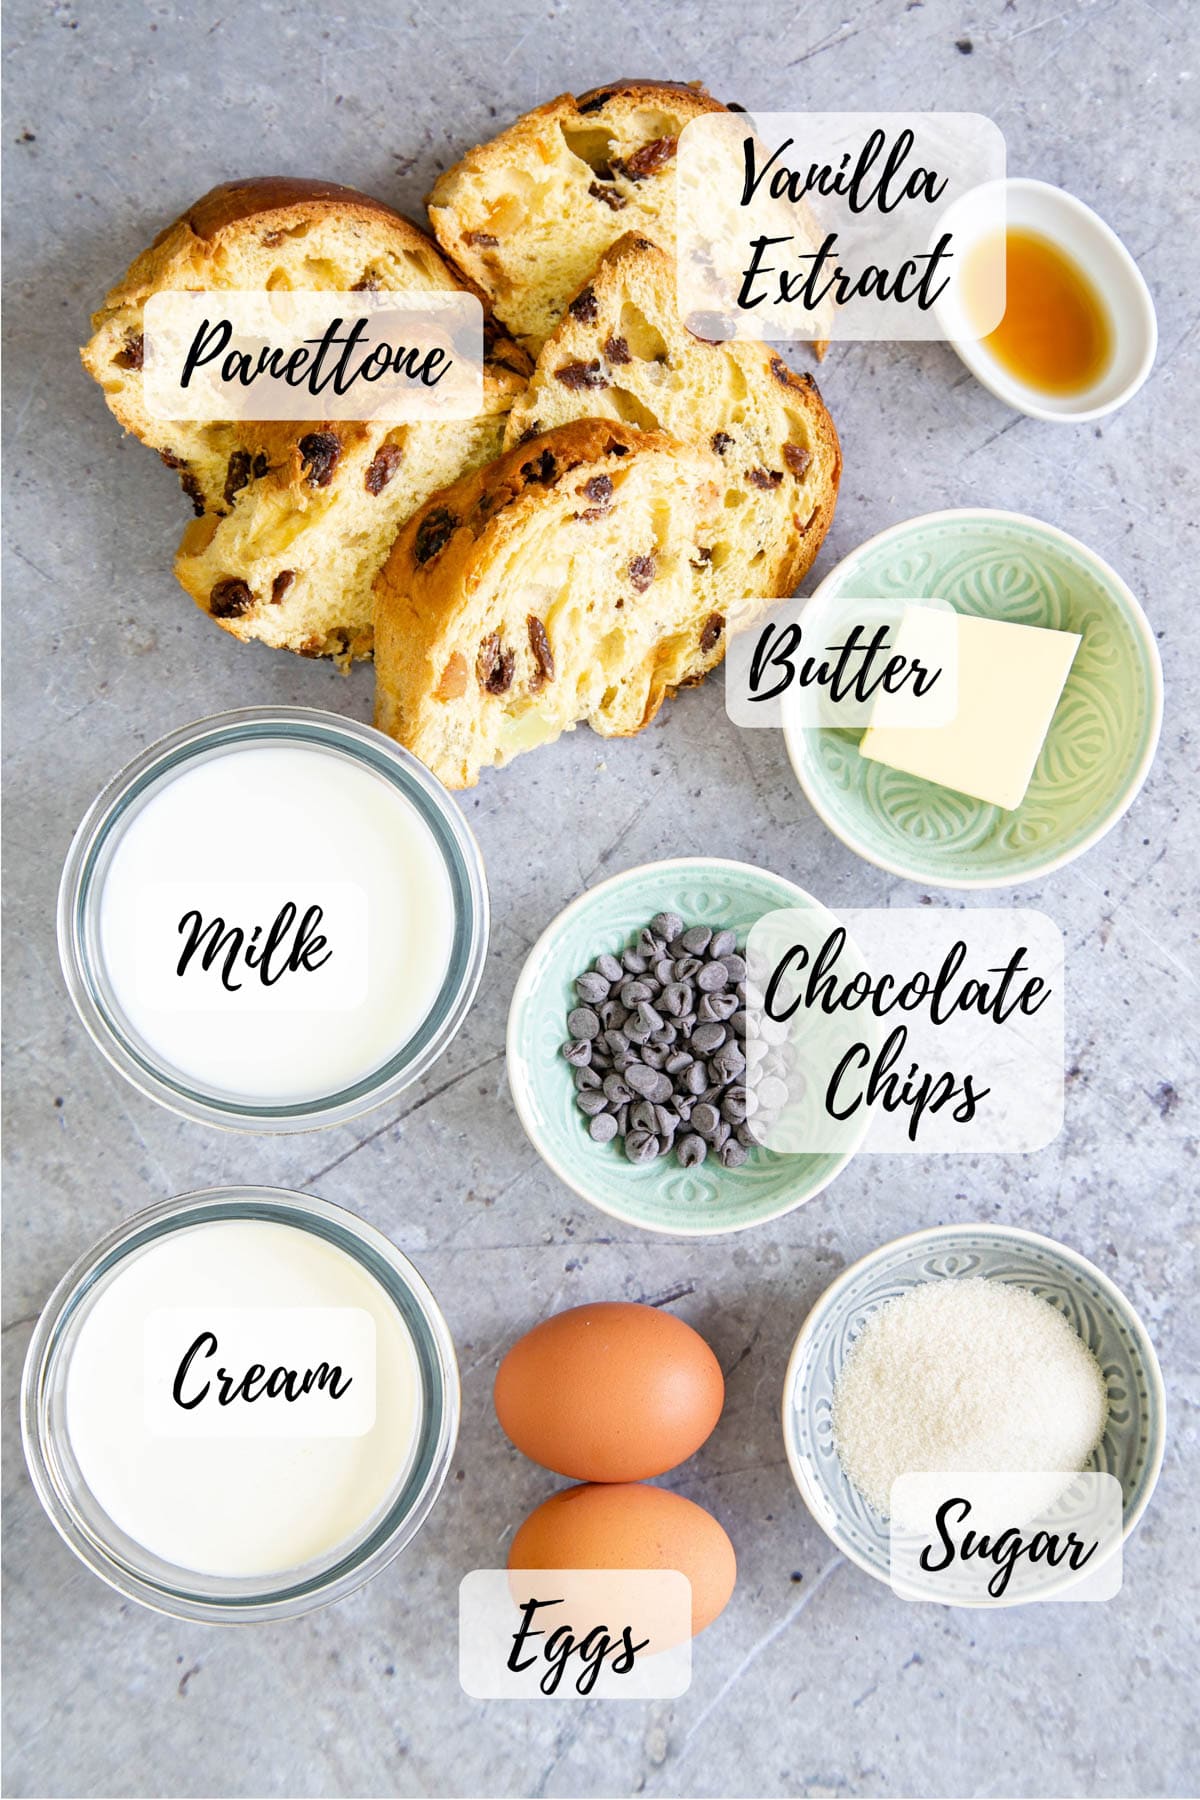 Ingredients: panettone, real gourmet vanilla extract, butter, chocolate chips, sugar, egg, cream, mil